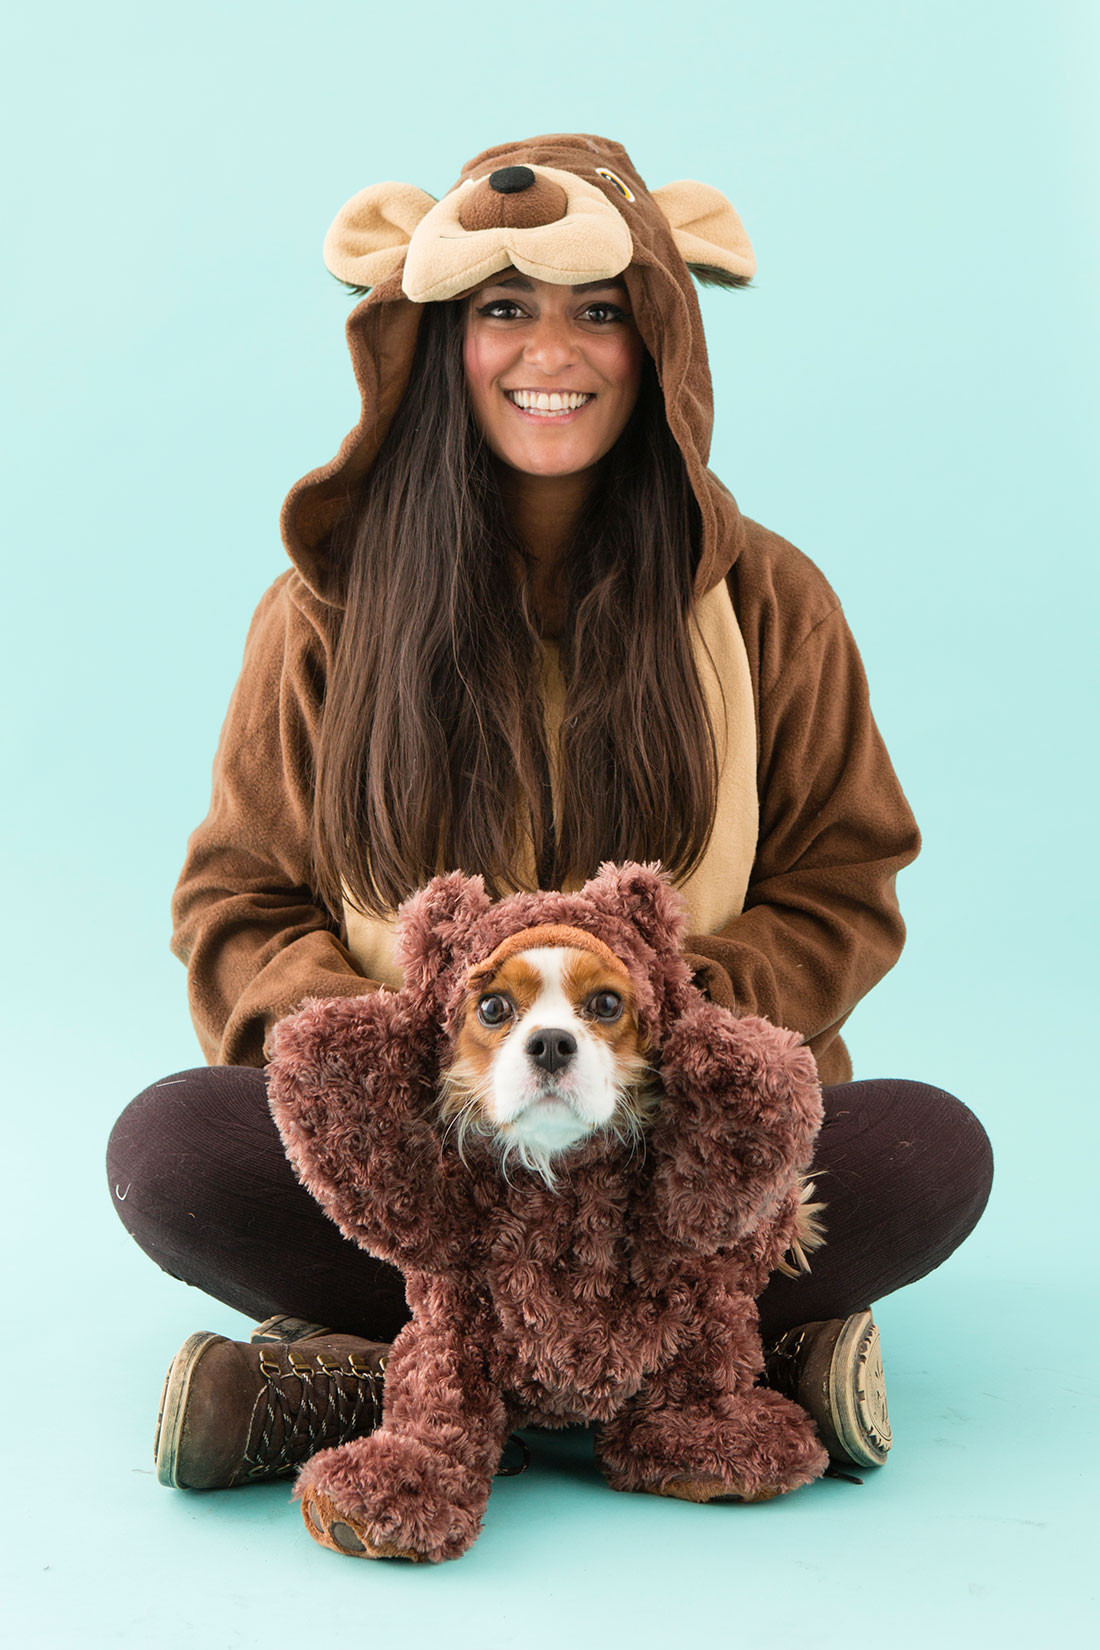 DIY Bear Costume
 30 DIY Halloween Costumes Worth Trying This Year The Xerxes